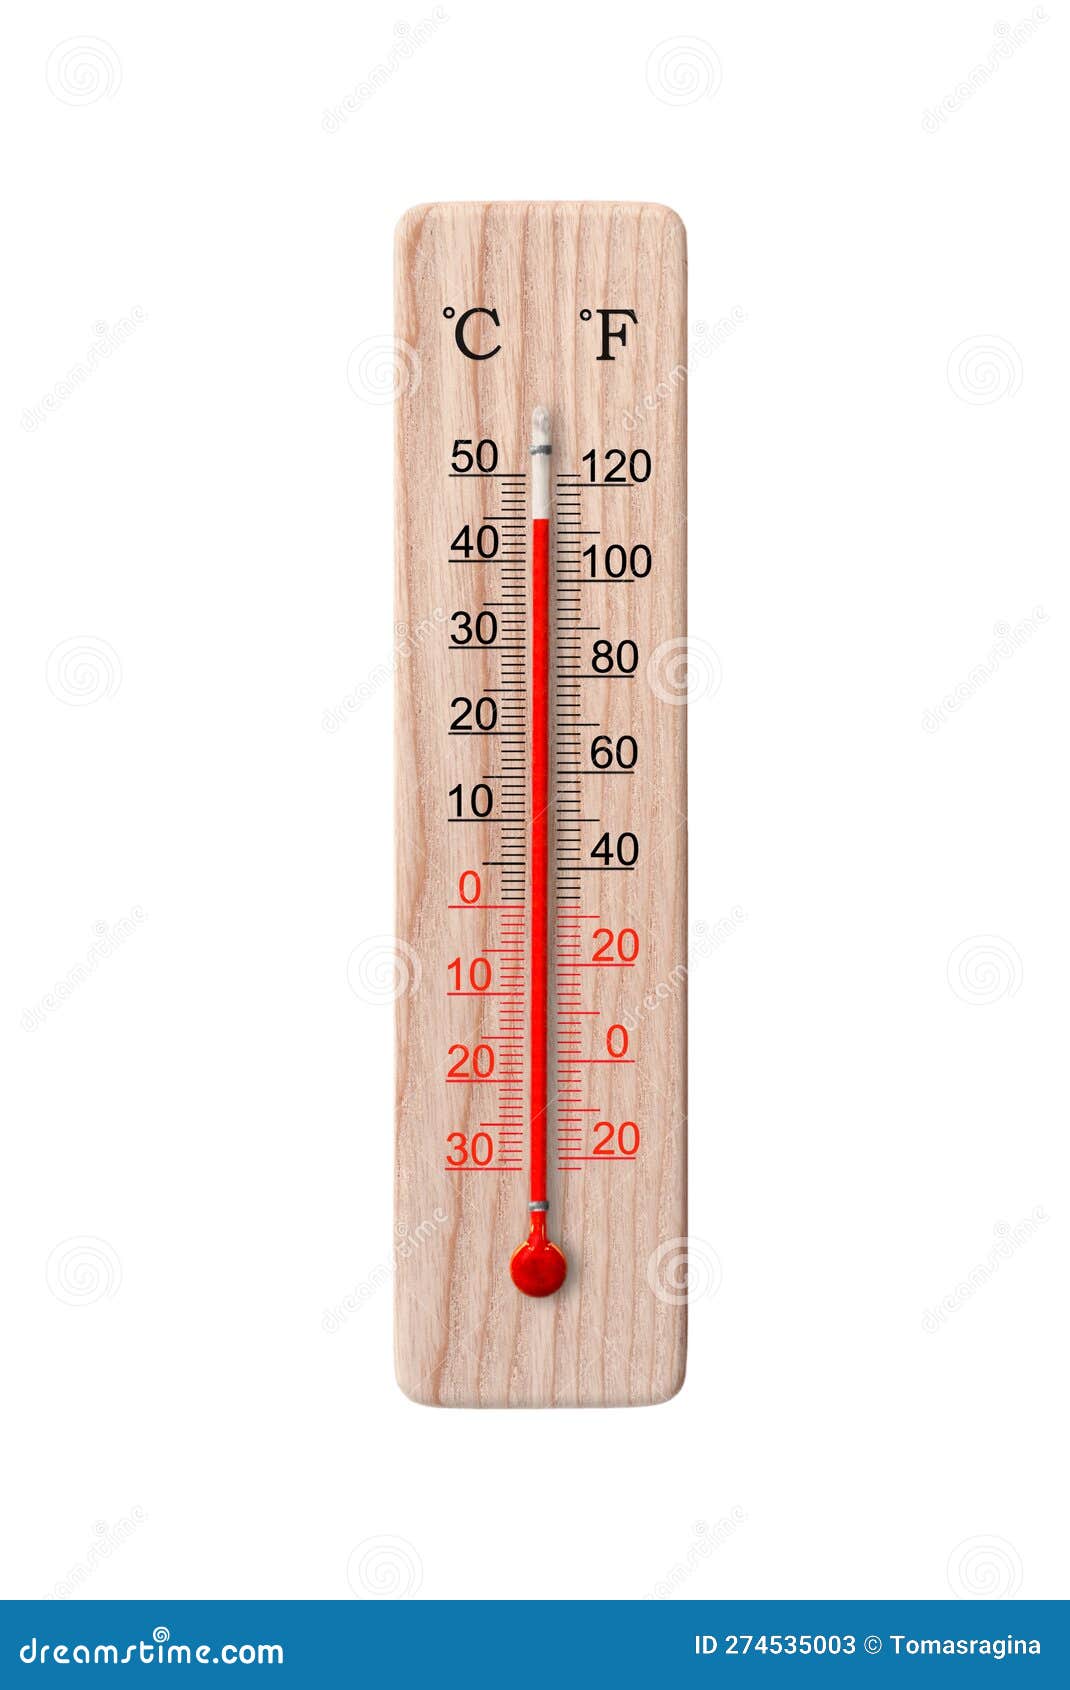 https://thumbs.dreamstime.com/z/wooden-celsius-fahrenheit-scale-thermometer-isolated-white-background-ambient-temperature-degrees-274535003.jpg